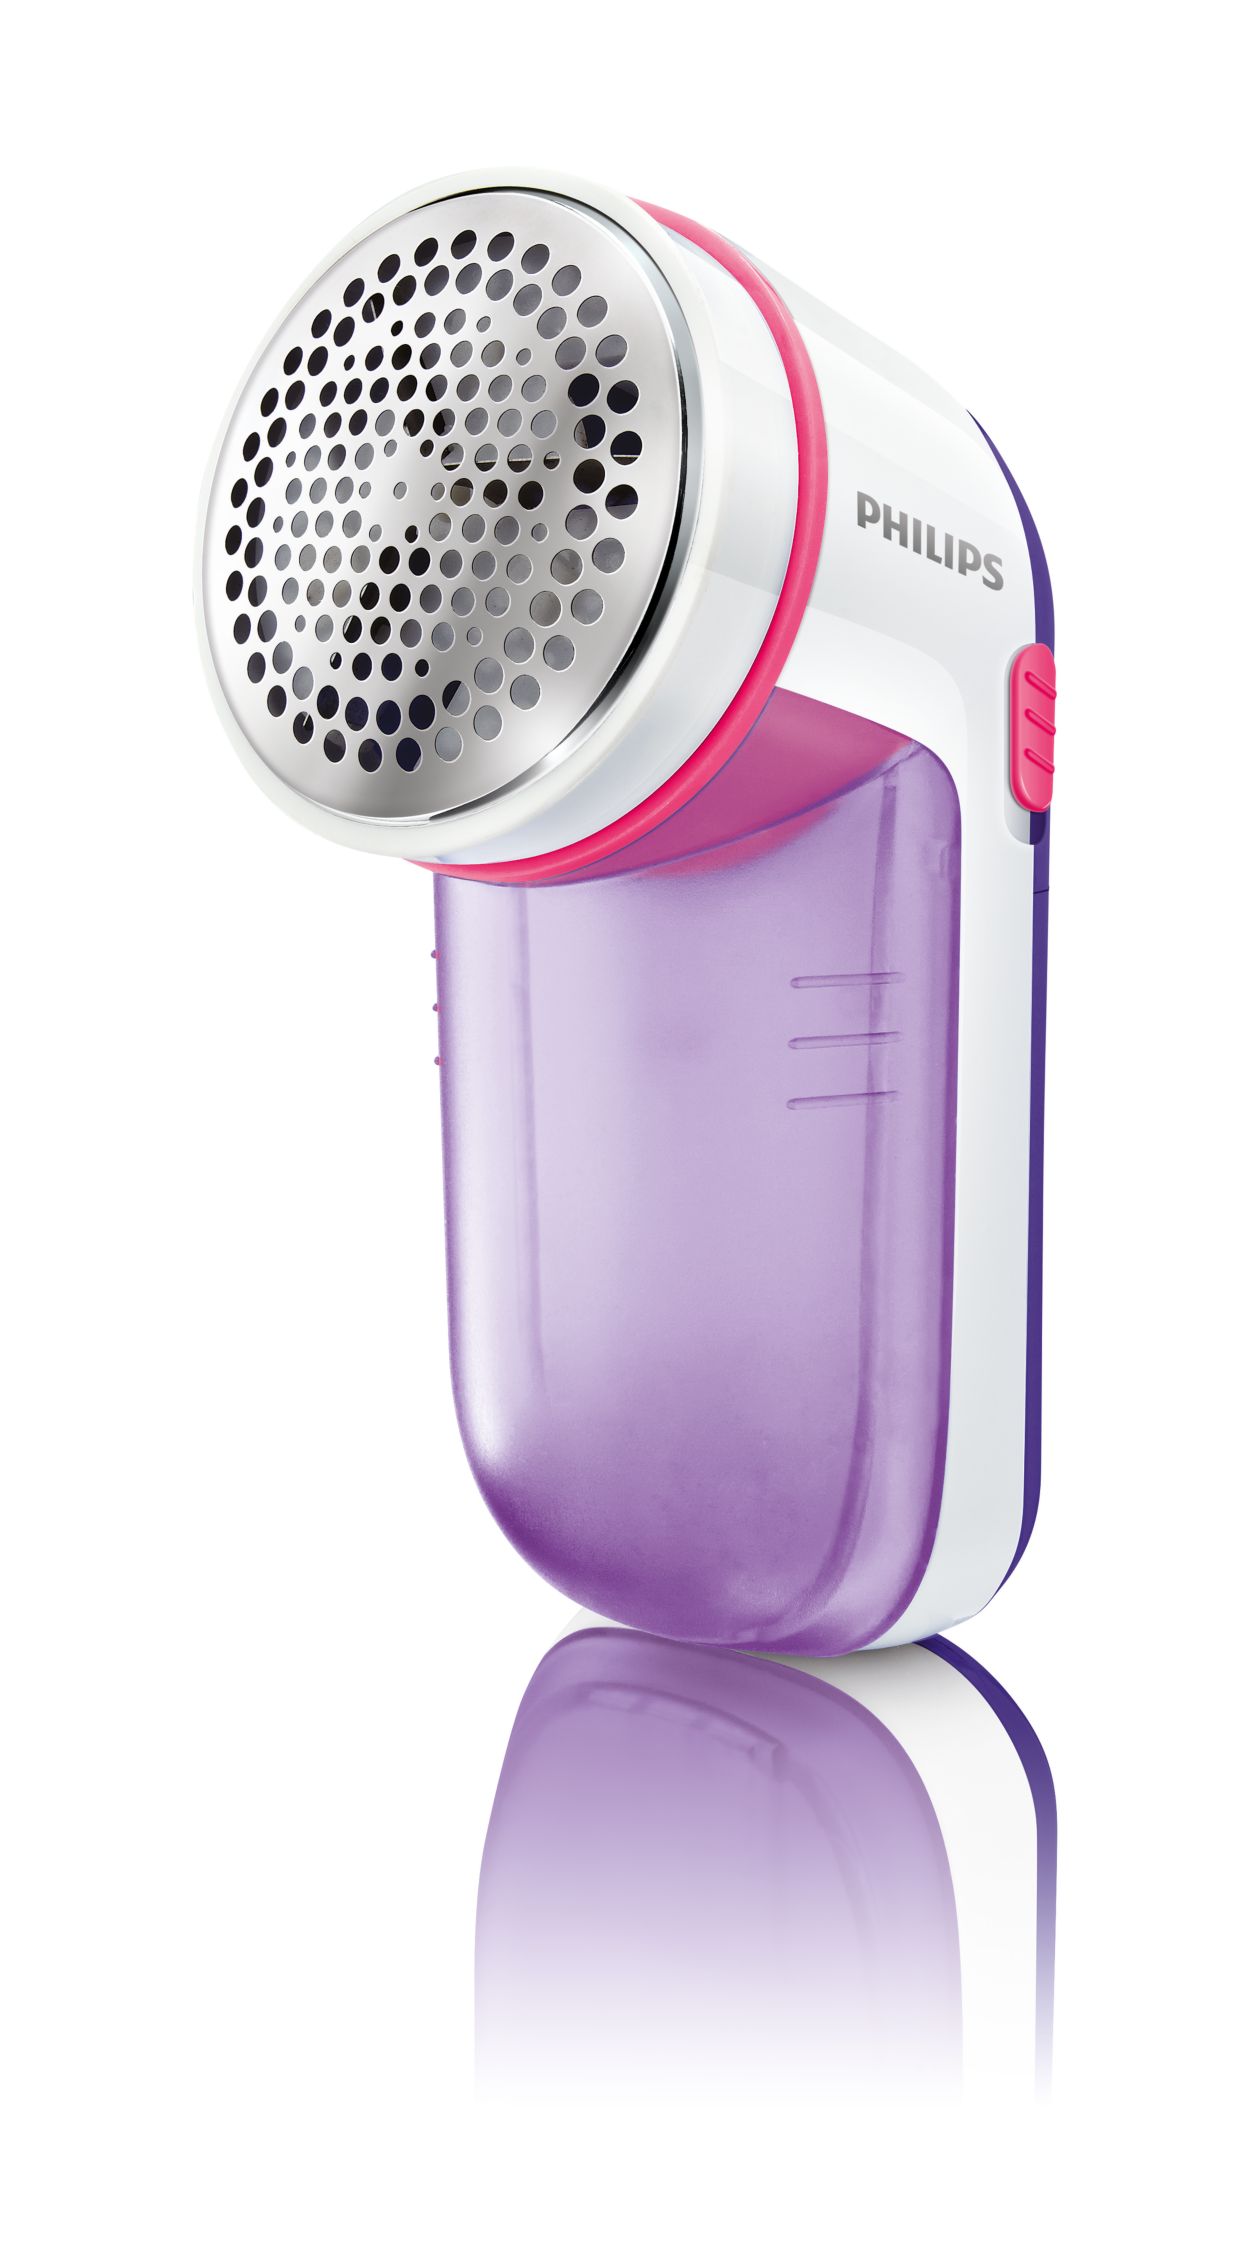 Philips GC026 Fabric Shaver Review